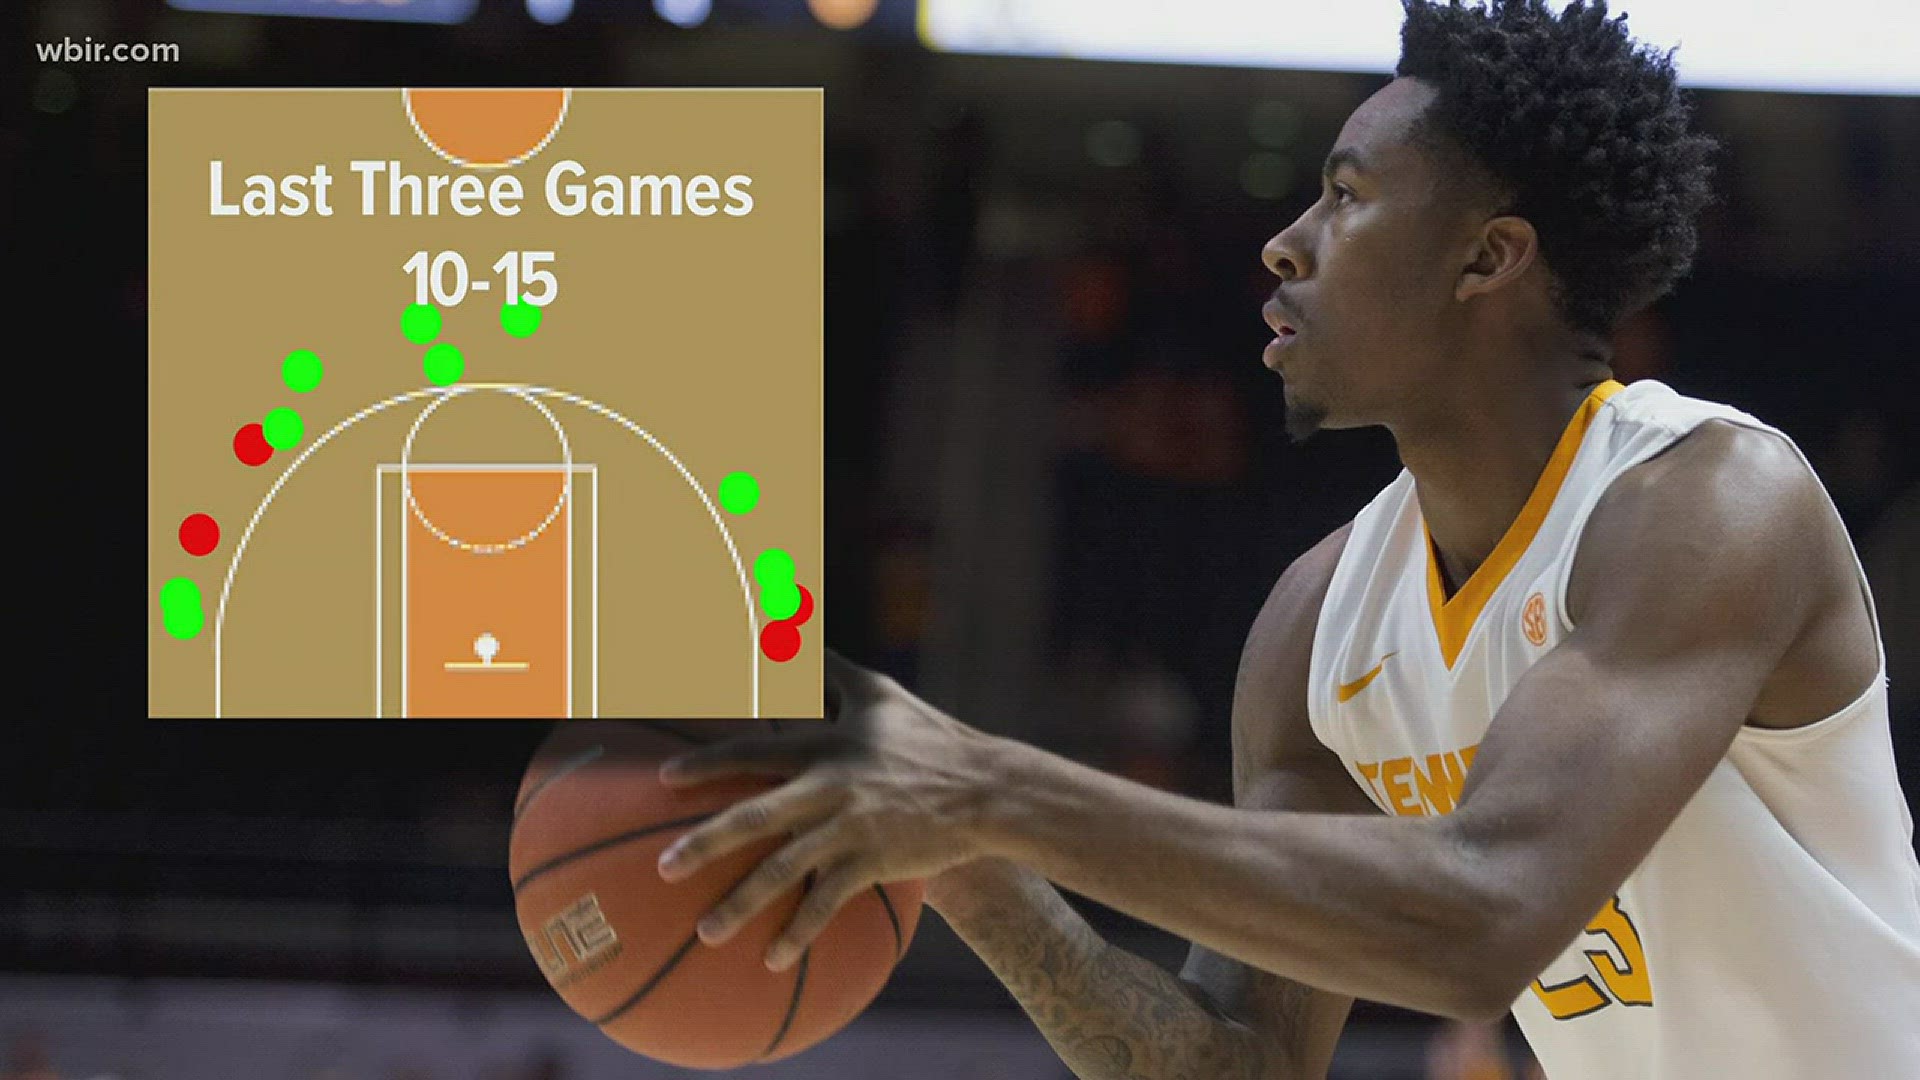 Carter High School grad Jordan Bowden knocked down all five of his three-point attempts in Tennessee's 79-60 win over Wake Forest. He's shooting 61.9 percent from three-point range this season, that leads the SEC.